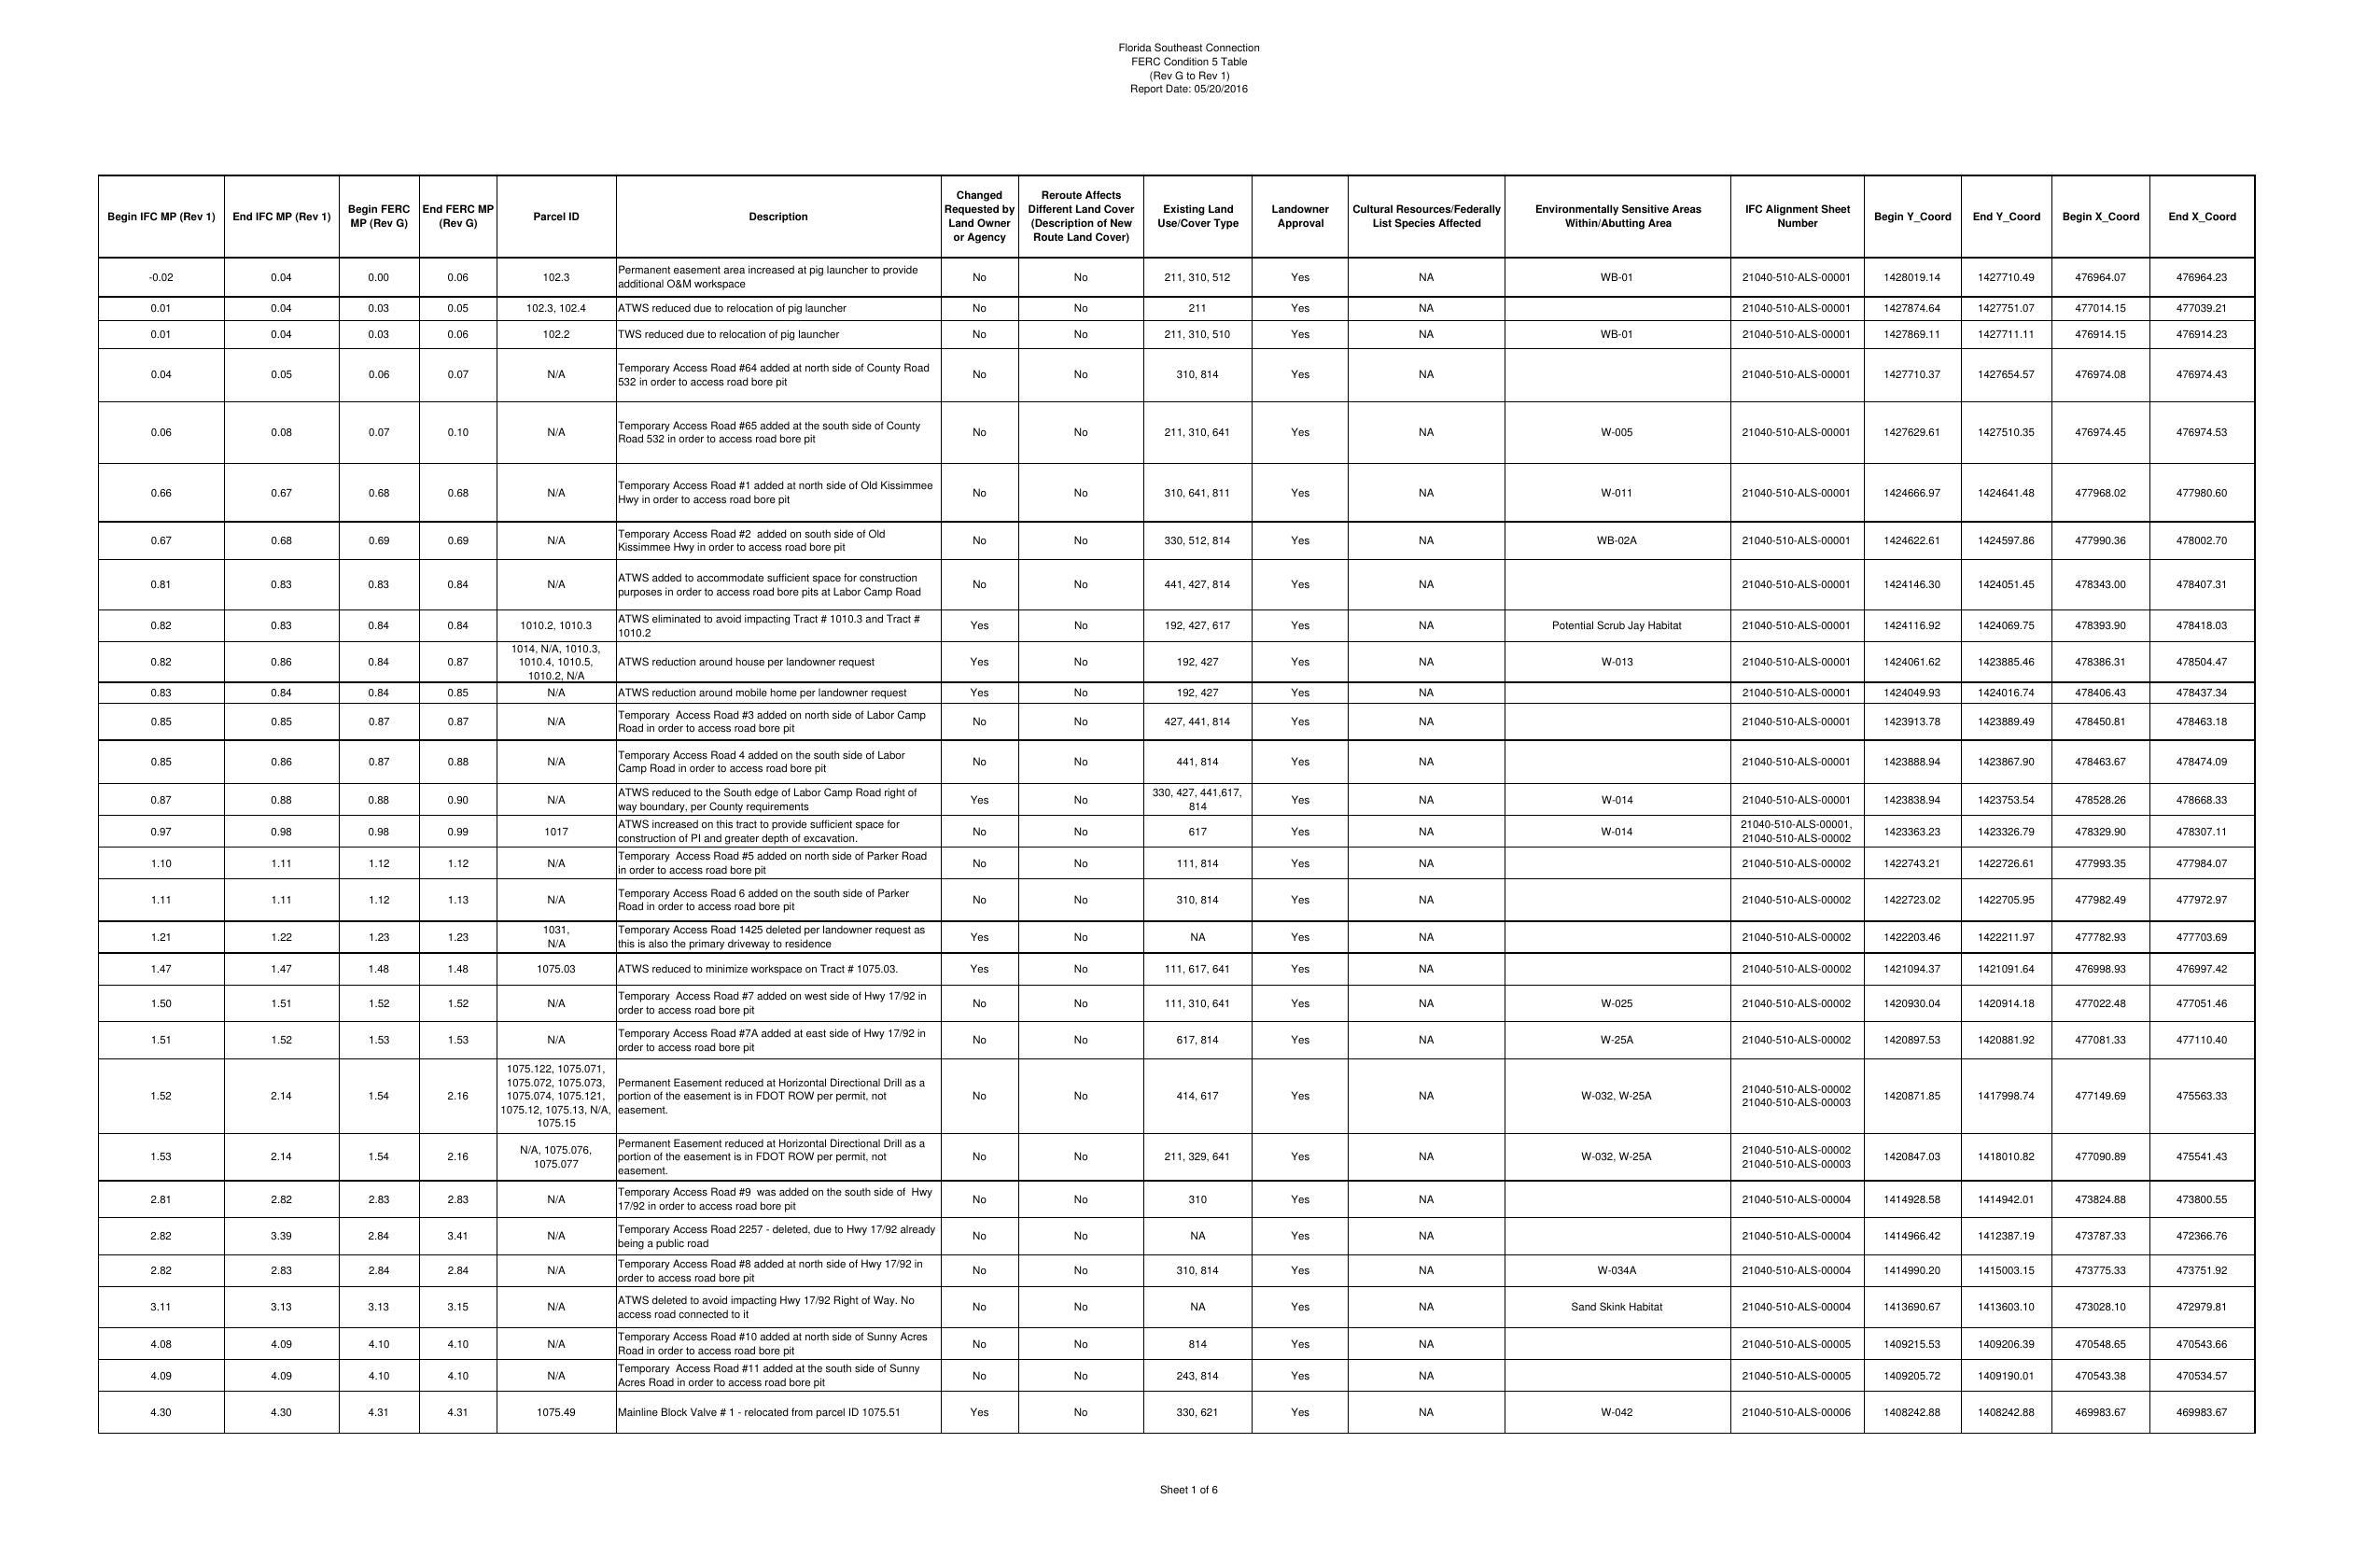 FERC Condition 5 Table (1 of 6)